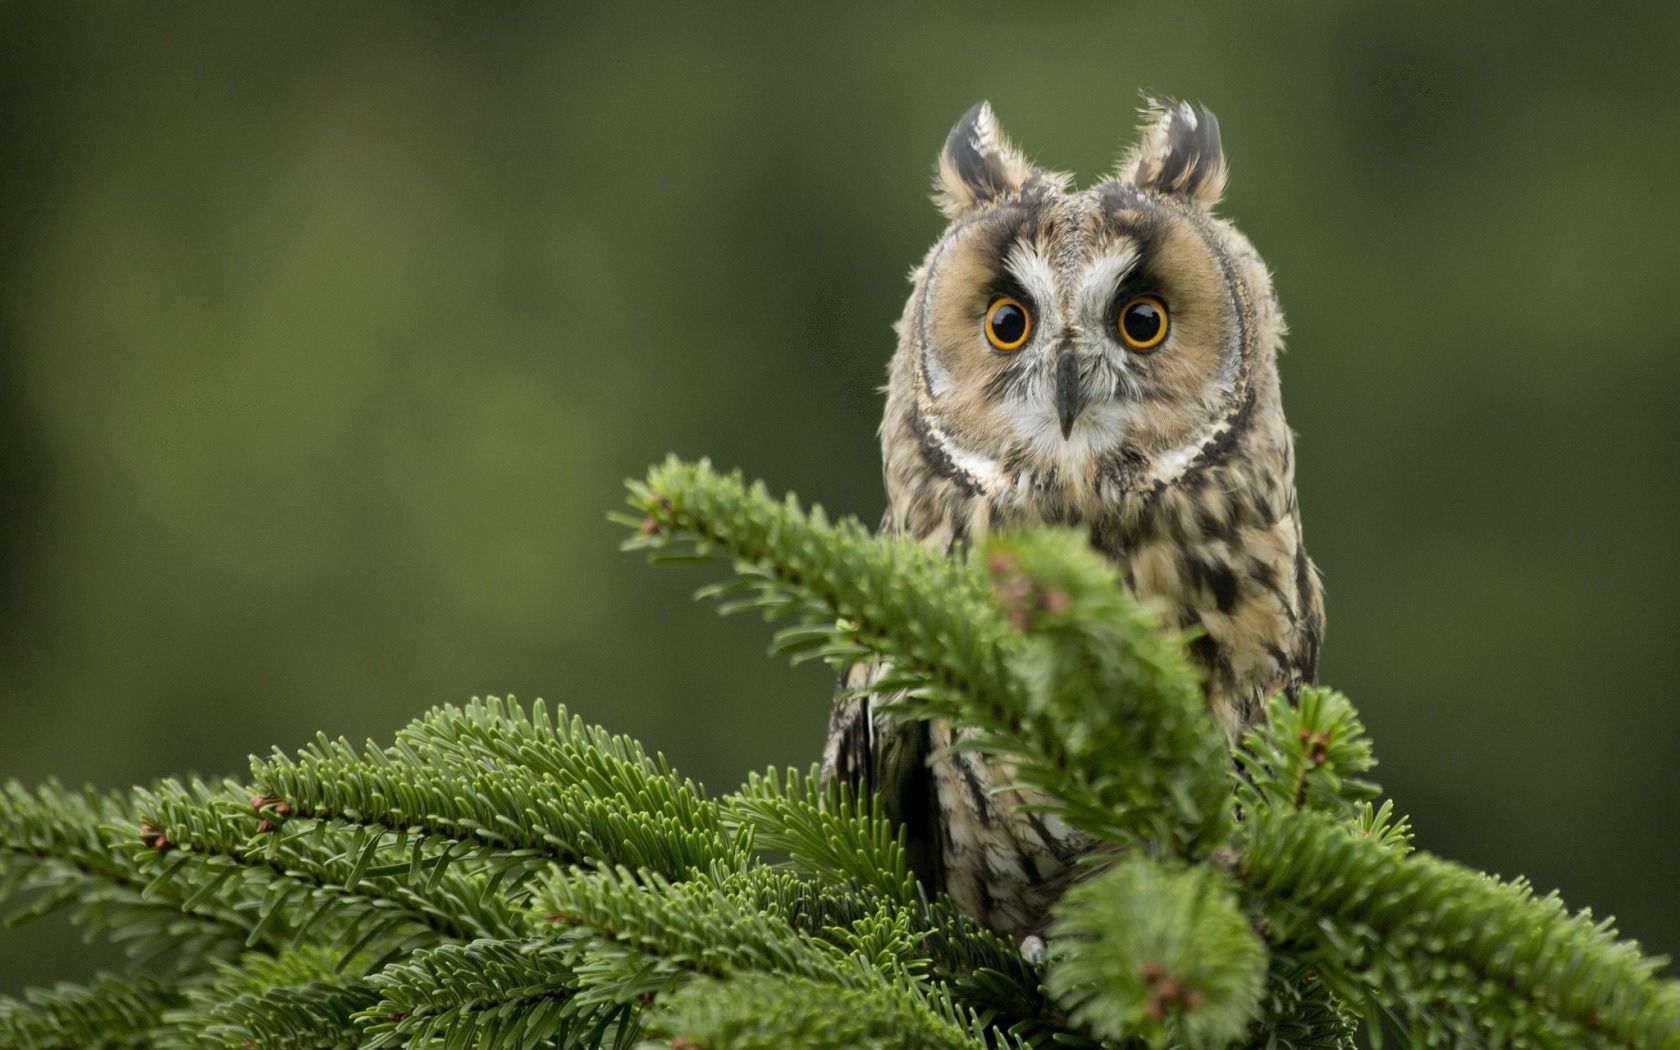 80018 3840x1080 PC pictures for free, download bird, predator, owl, branch 3840x1080 wallpapers on your desktop